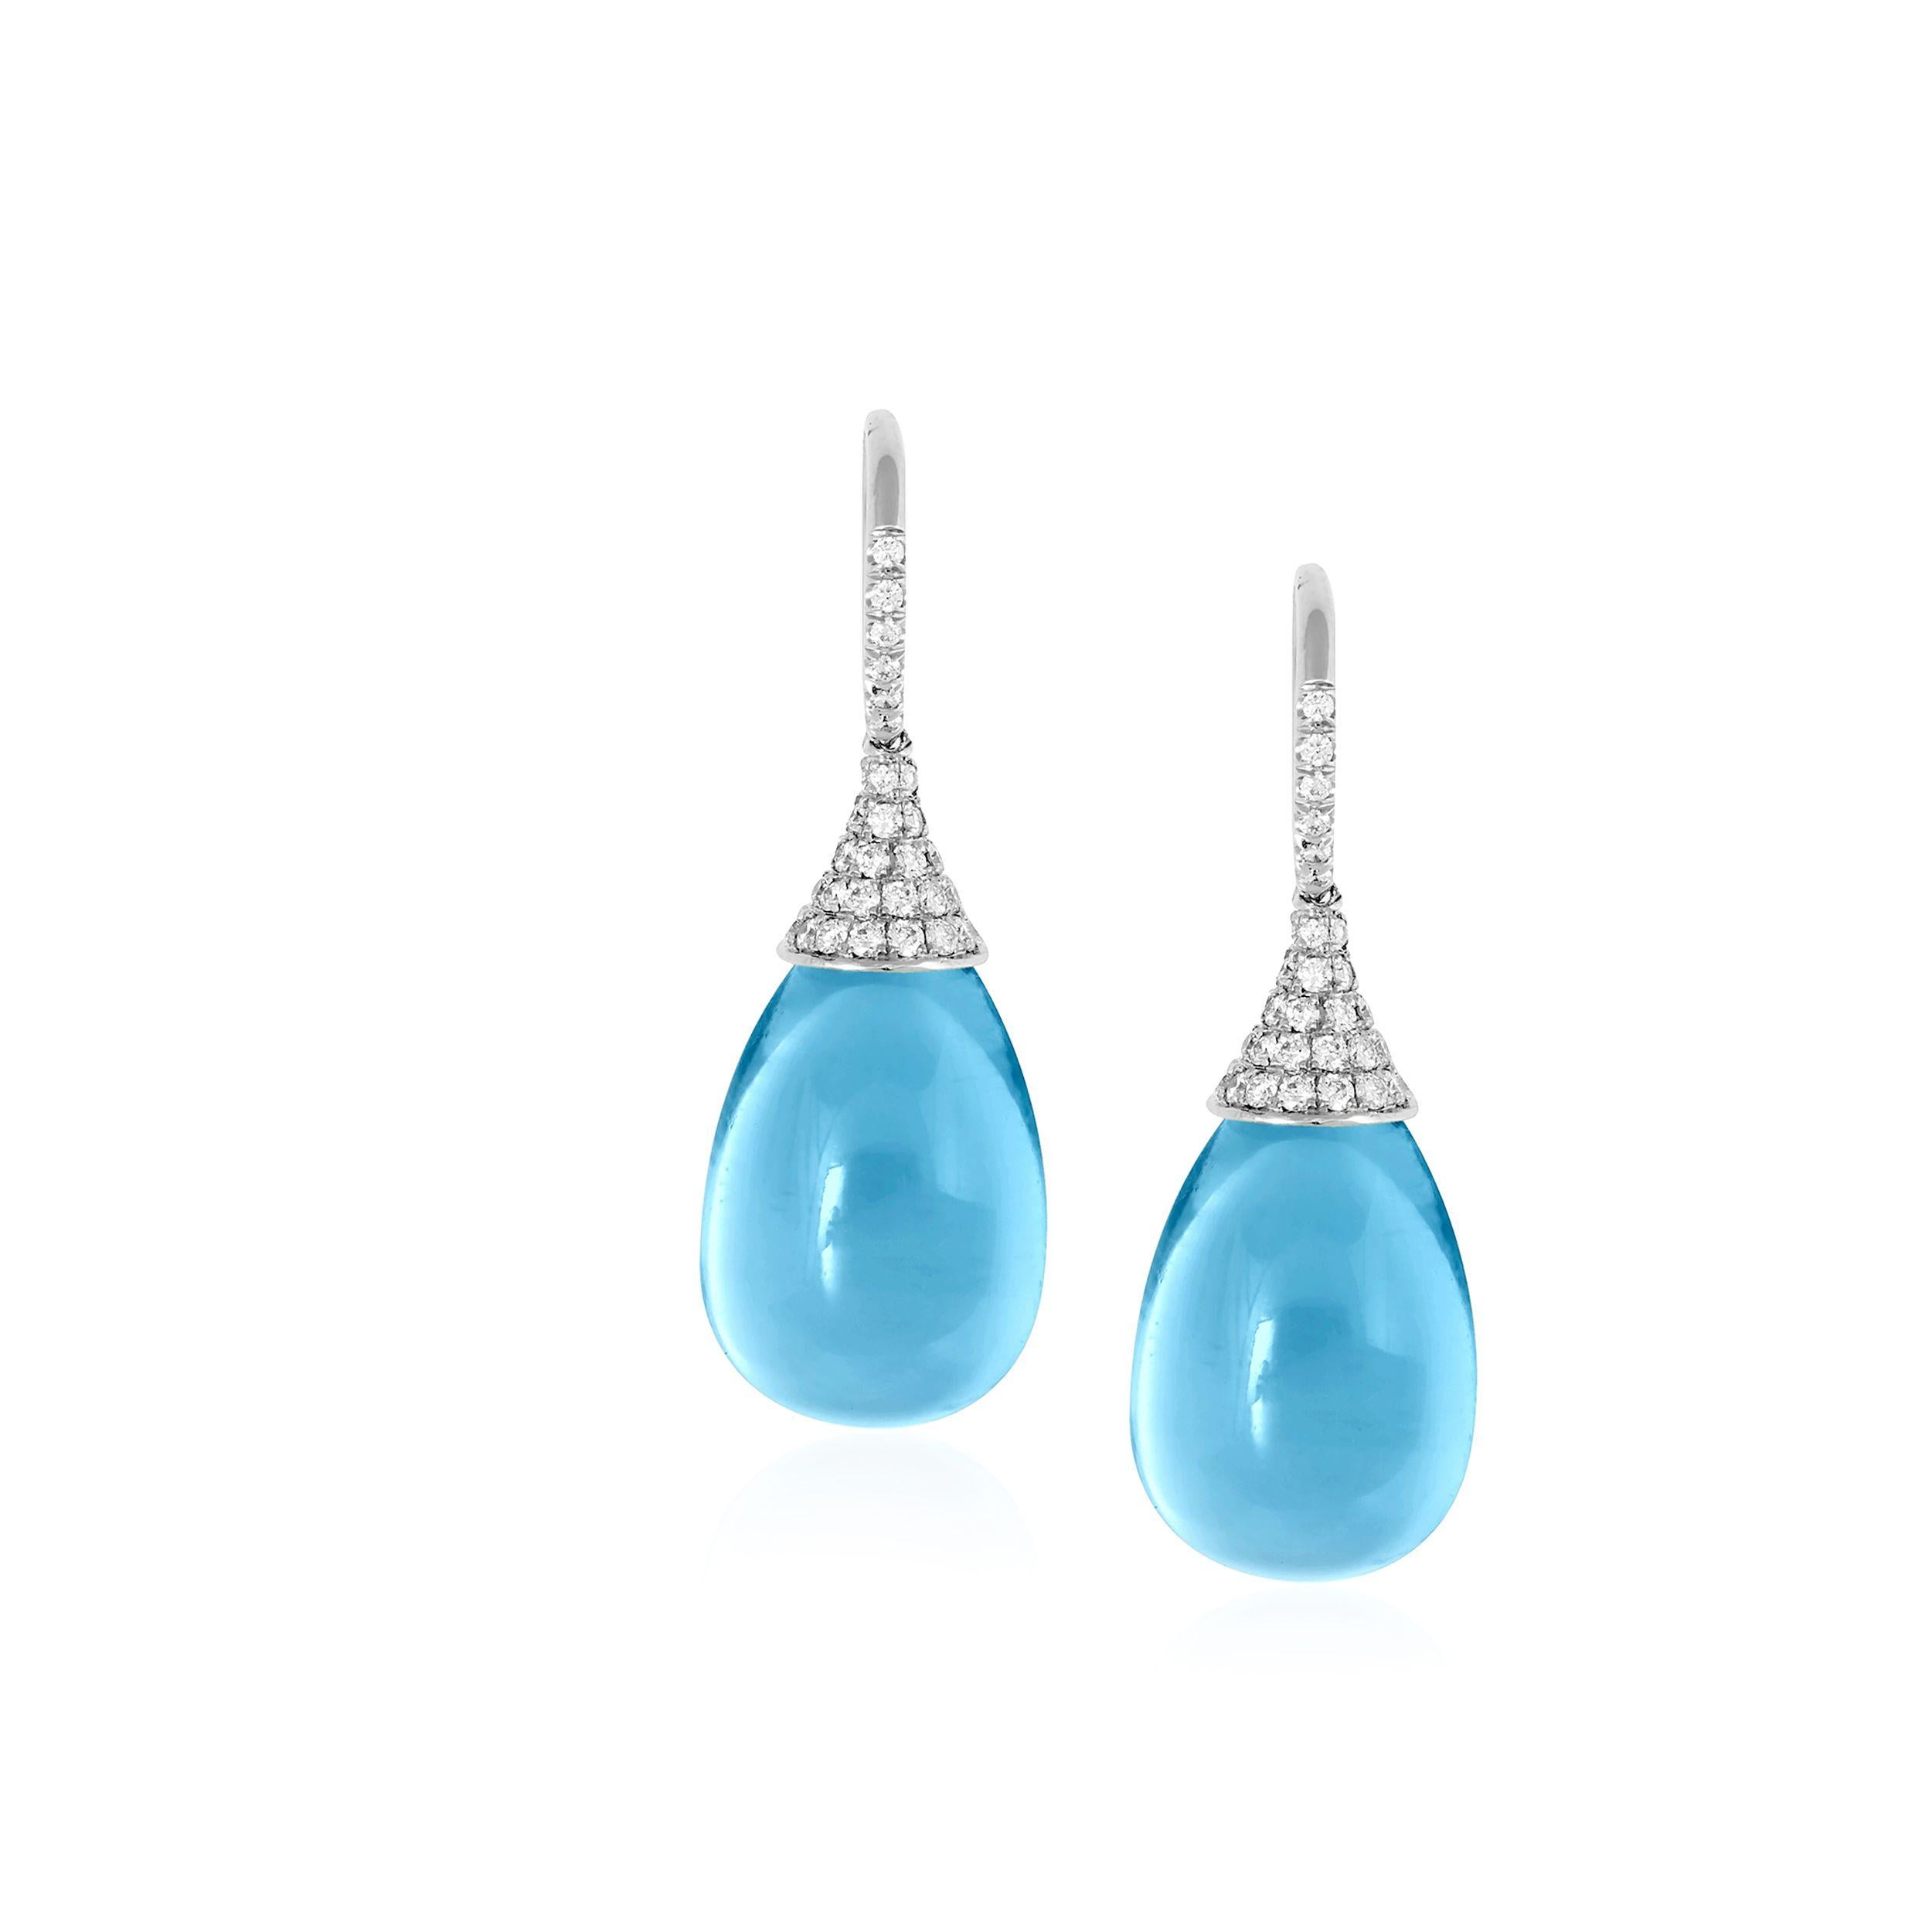 Contemporary Goshwara Blue Topaz Drop and Diamond Earrings For Sale